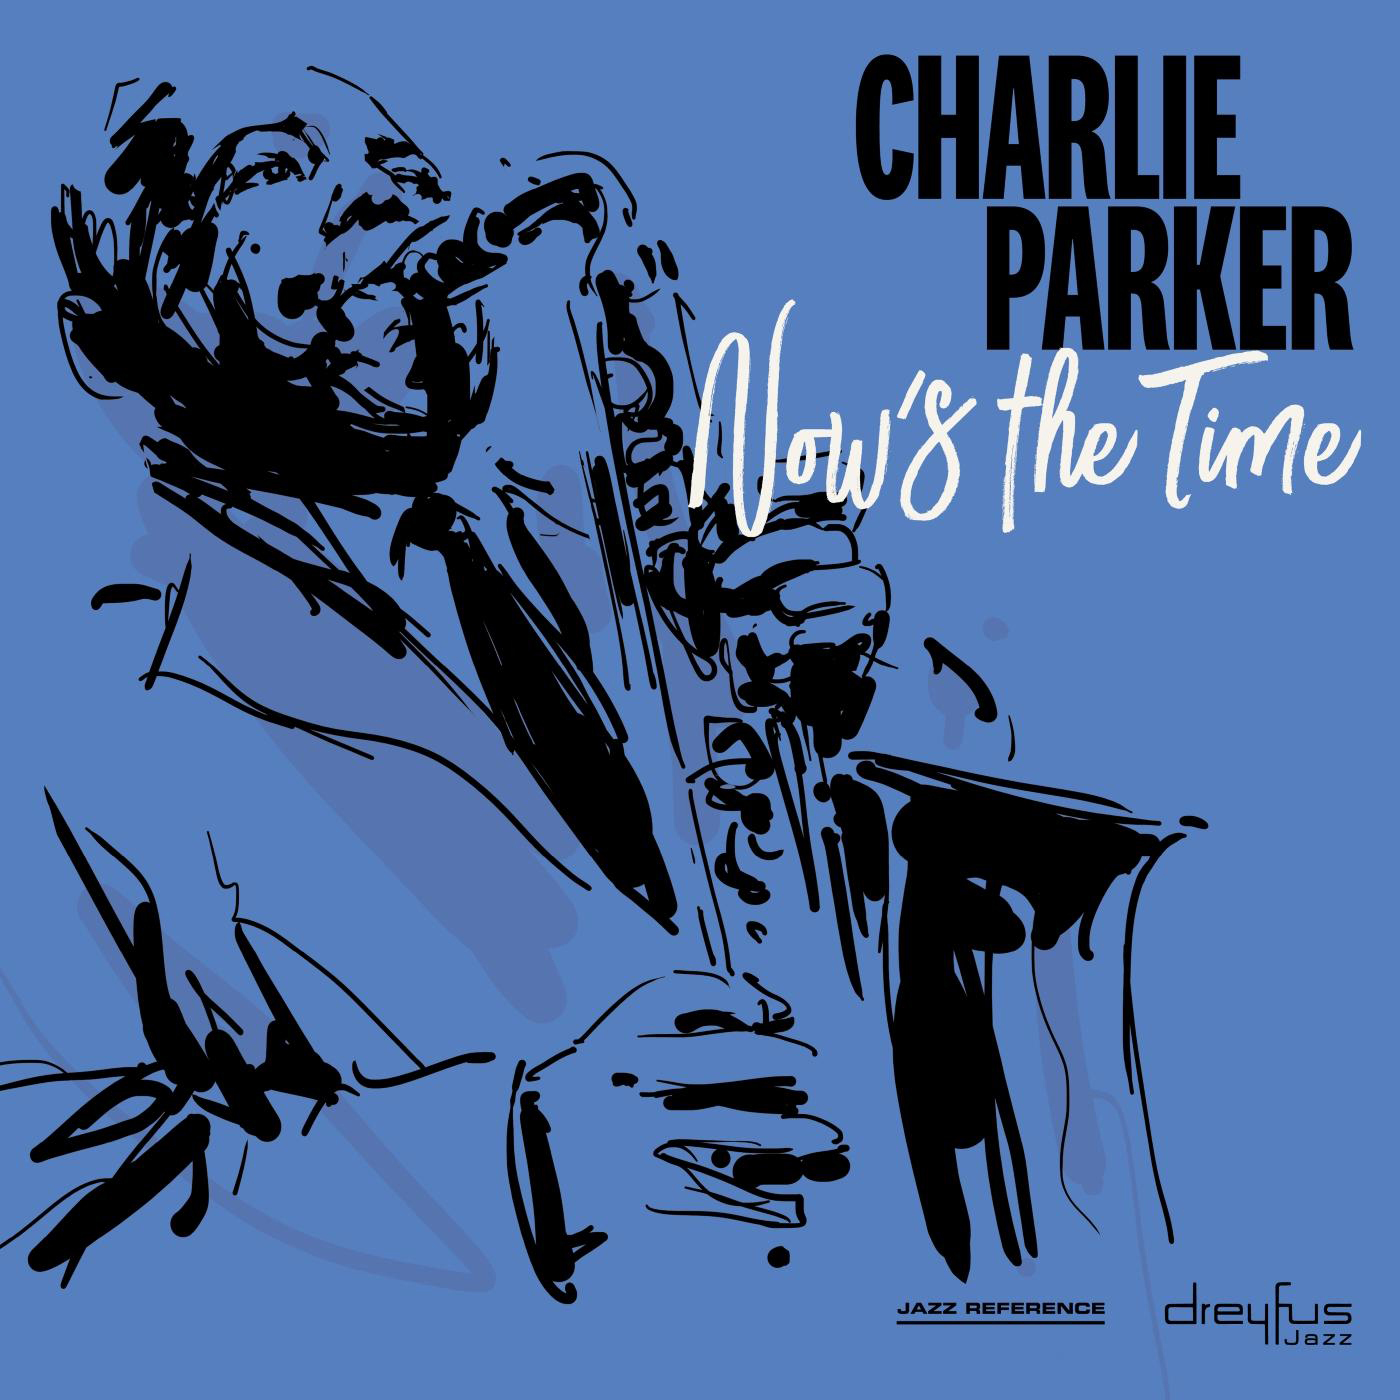 Charlie Parker - (Vinyl) the Now\'s Time 